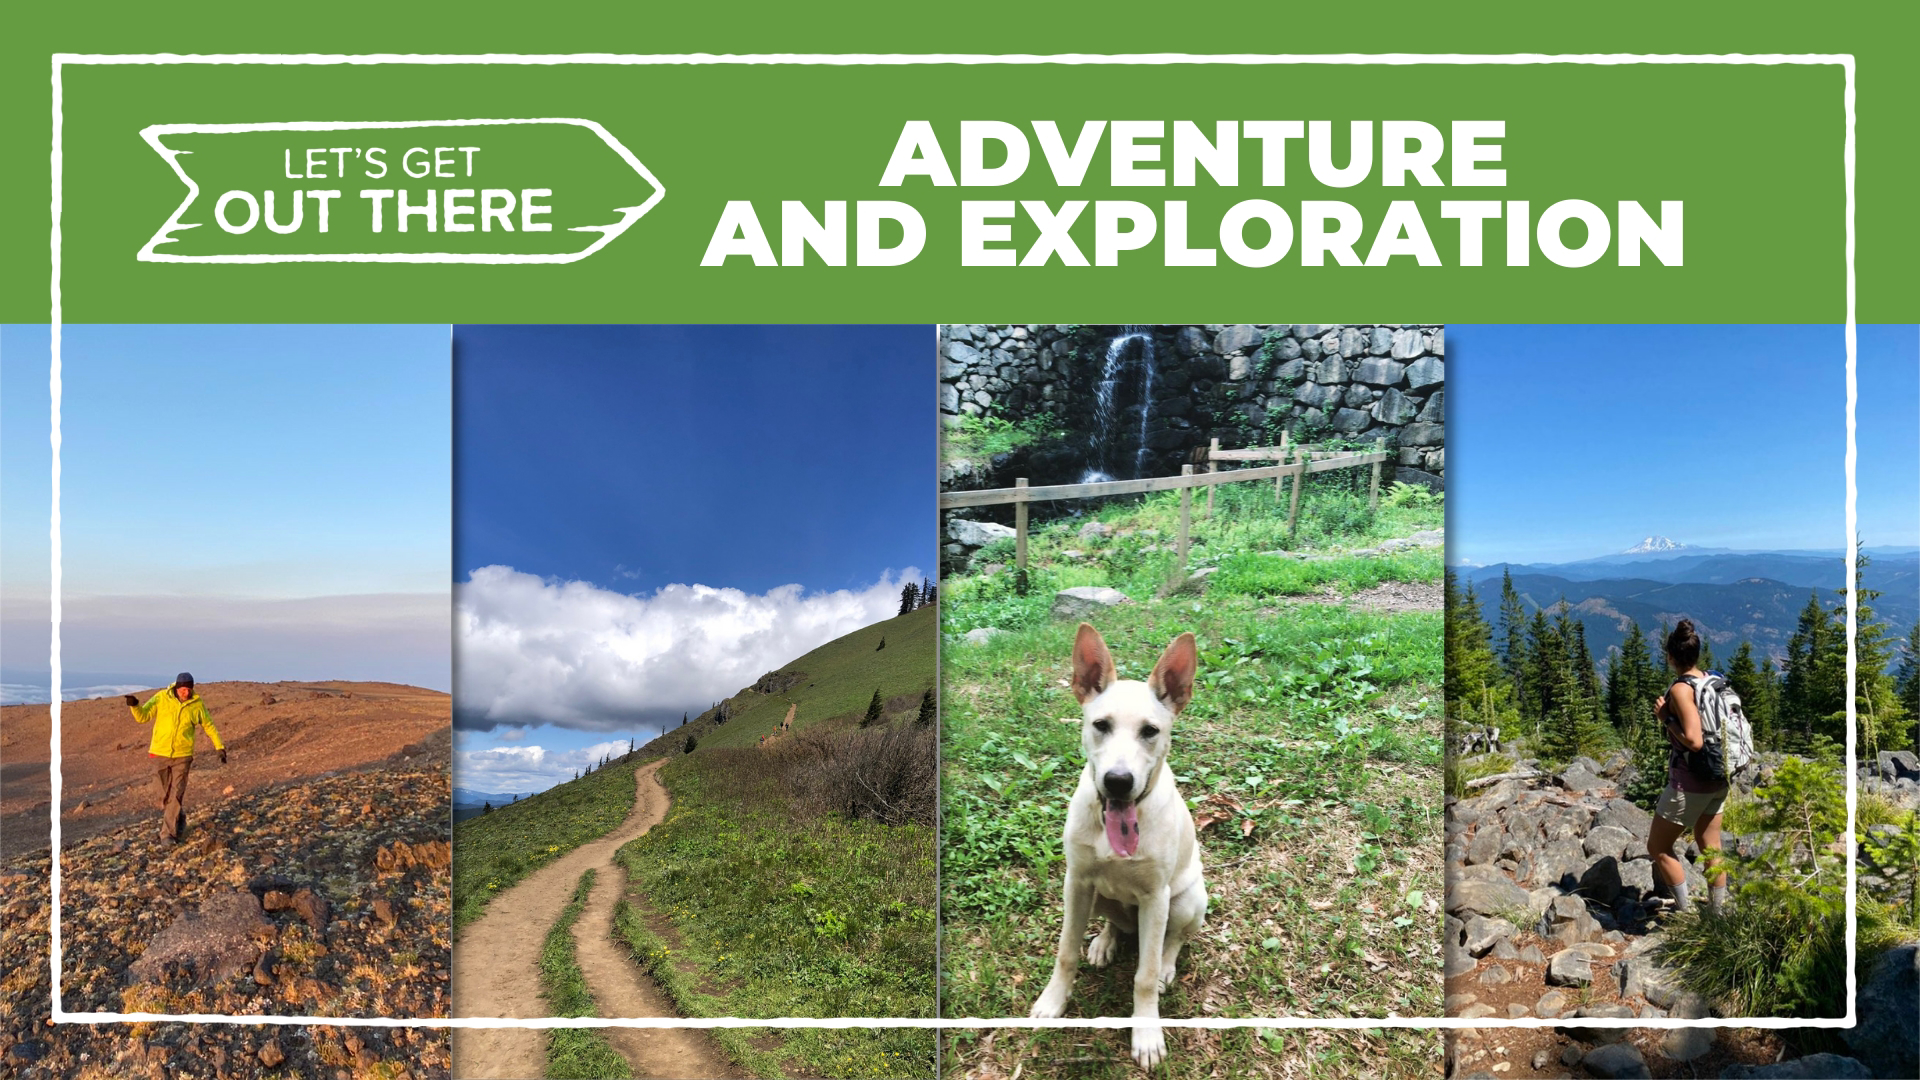 KGW reporter and photojournalist Jon Goodwin takes us on easy to find adventures in our series, Let's Get Out There.